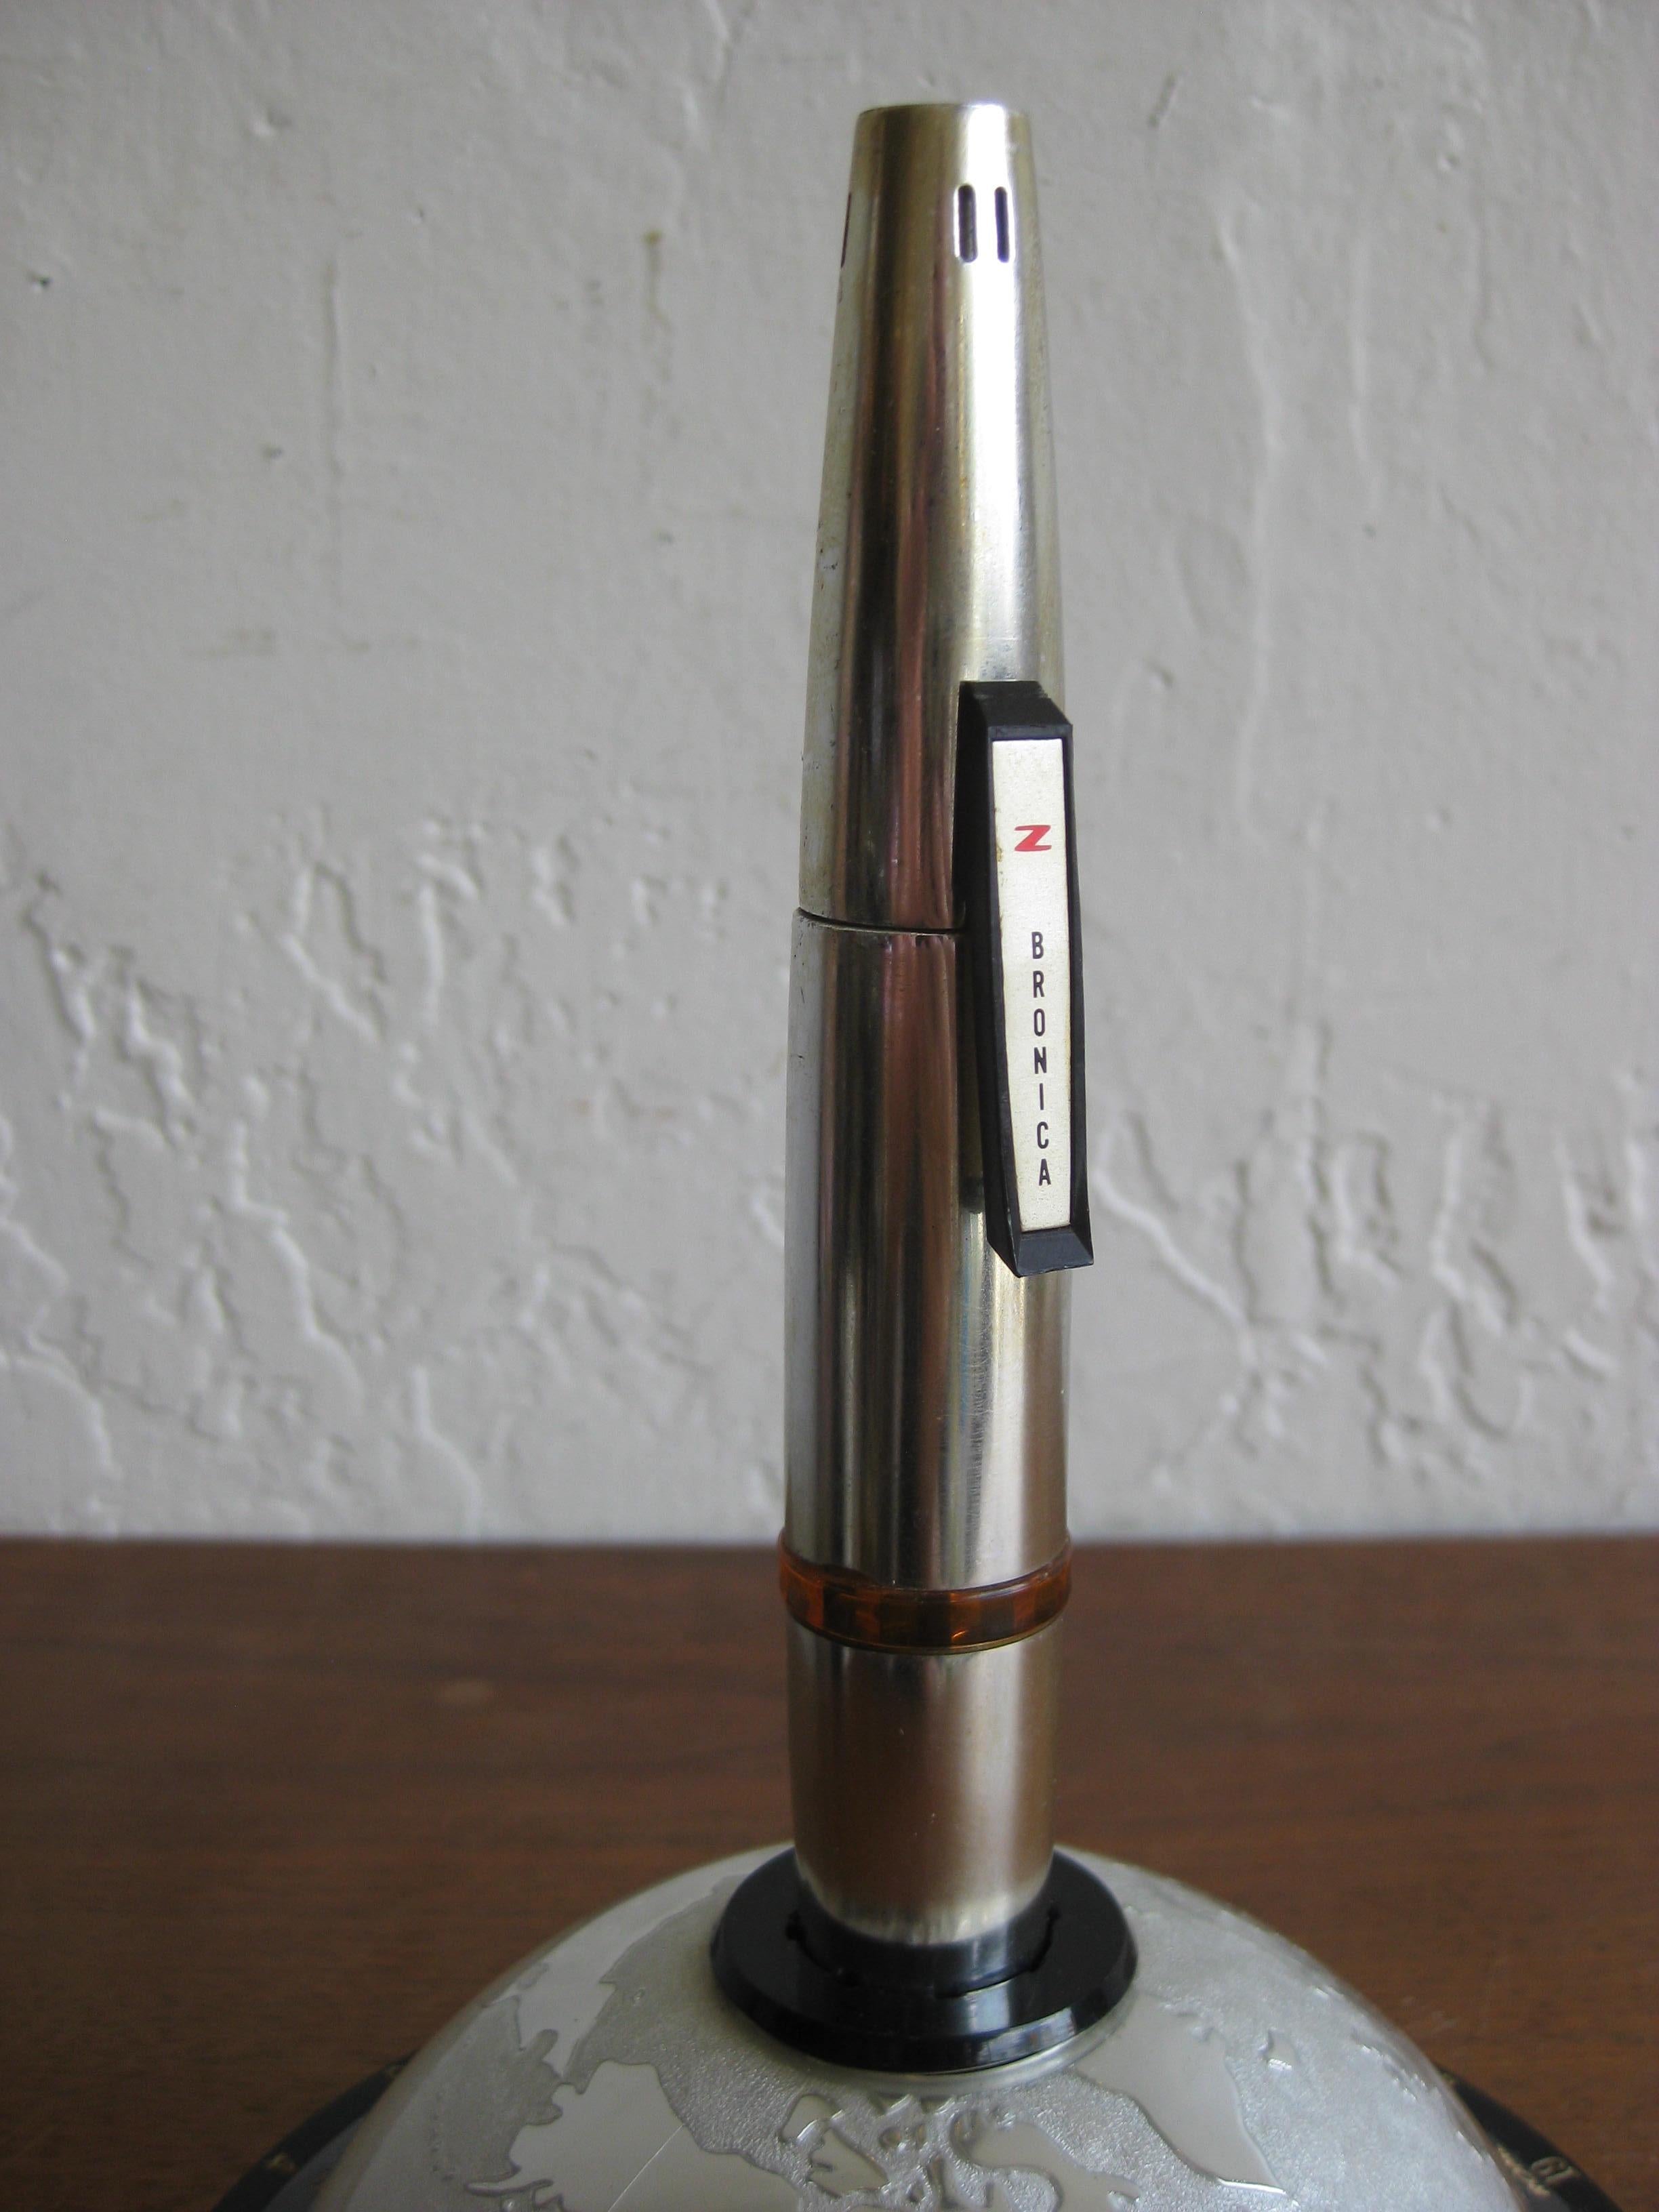 Great space age figural table lighter made by Zenza Bronica. In the shape of a rocket and the base is the globe. 1960s midcentury design at its finest. In very nice original condition, needing only butane to work.